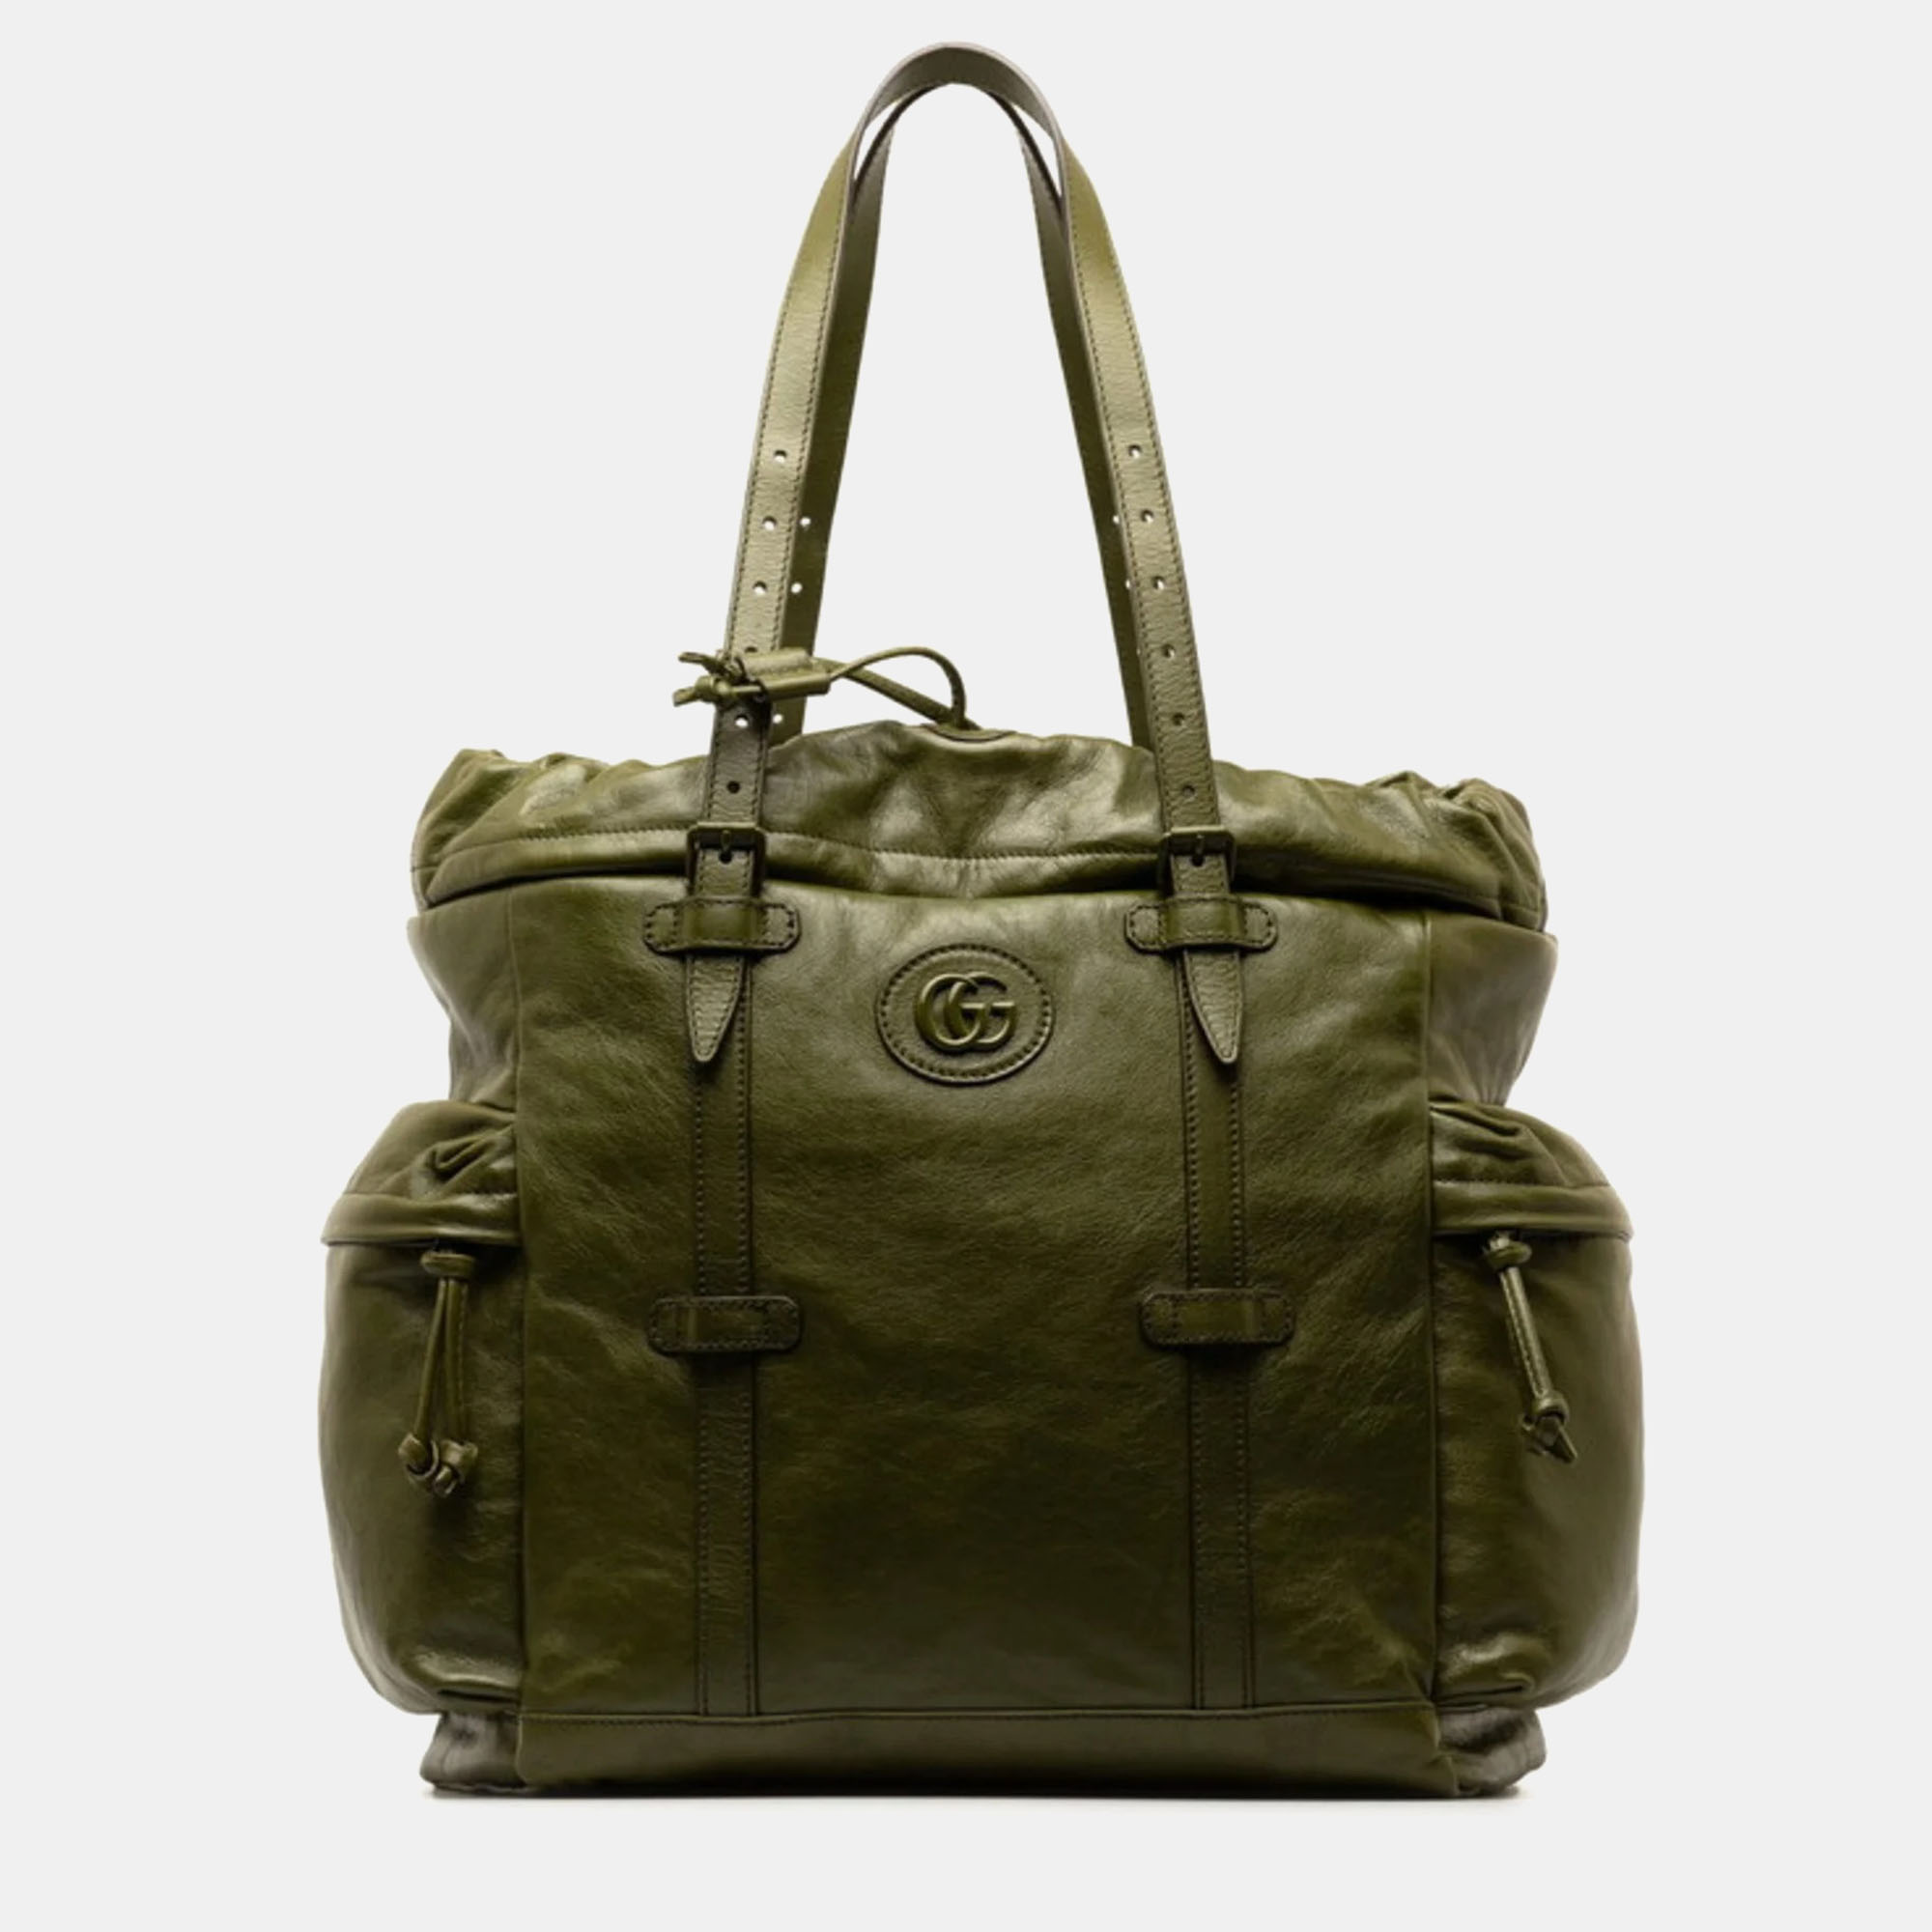 Gucci green leather double g drawstring tote bag